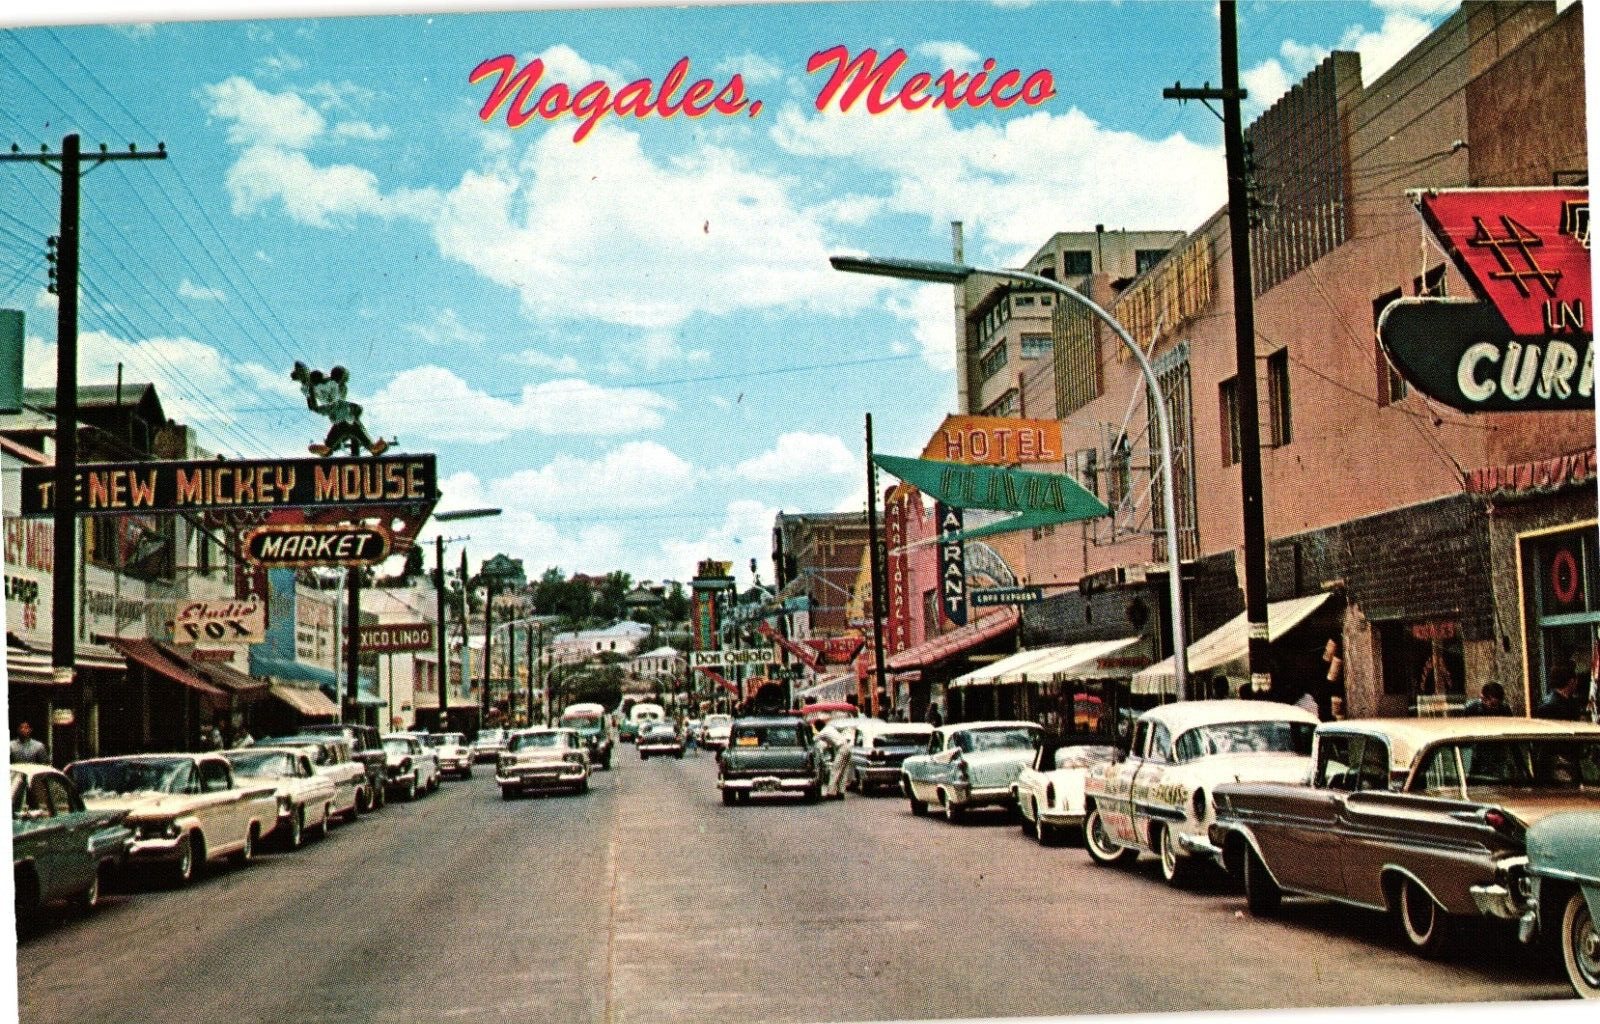 Nogales Mexico Street View Cars Shops Chrome Unposted Postcard 1950s